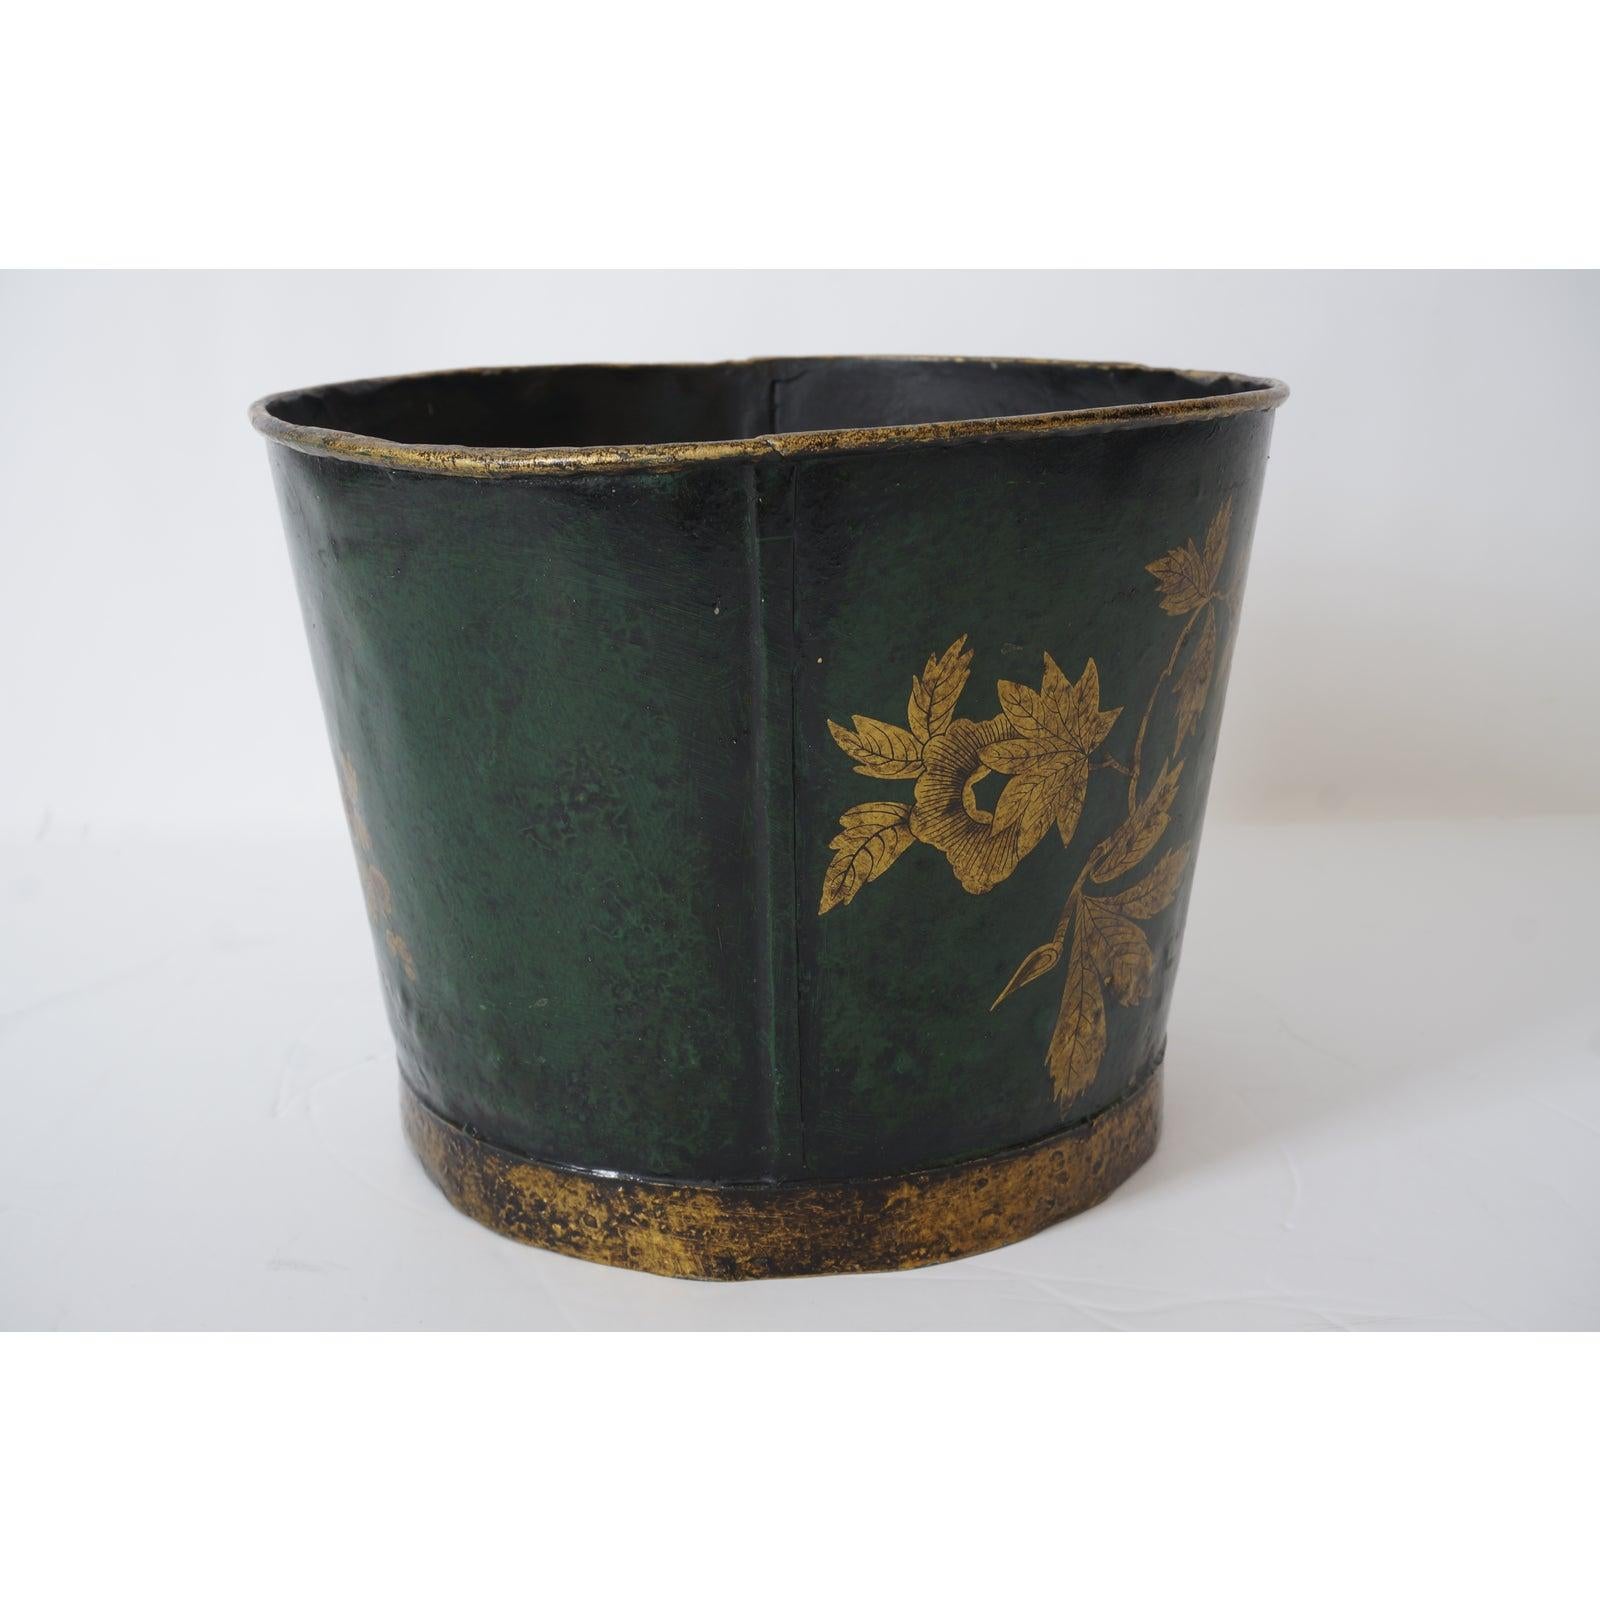 This stylish anc charming toleware bucket dates to the late 19th century and is hand painted in emeral green with gilt-gold butterfles, foliage and trim.

Note: Dimensions are 8.50